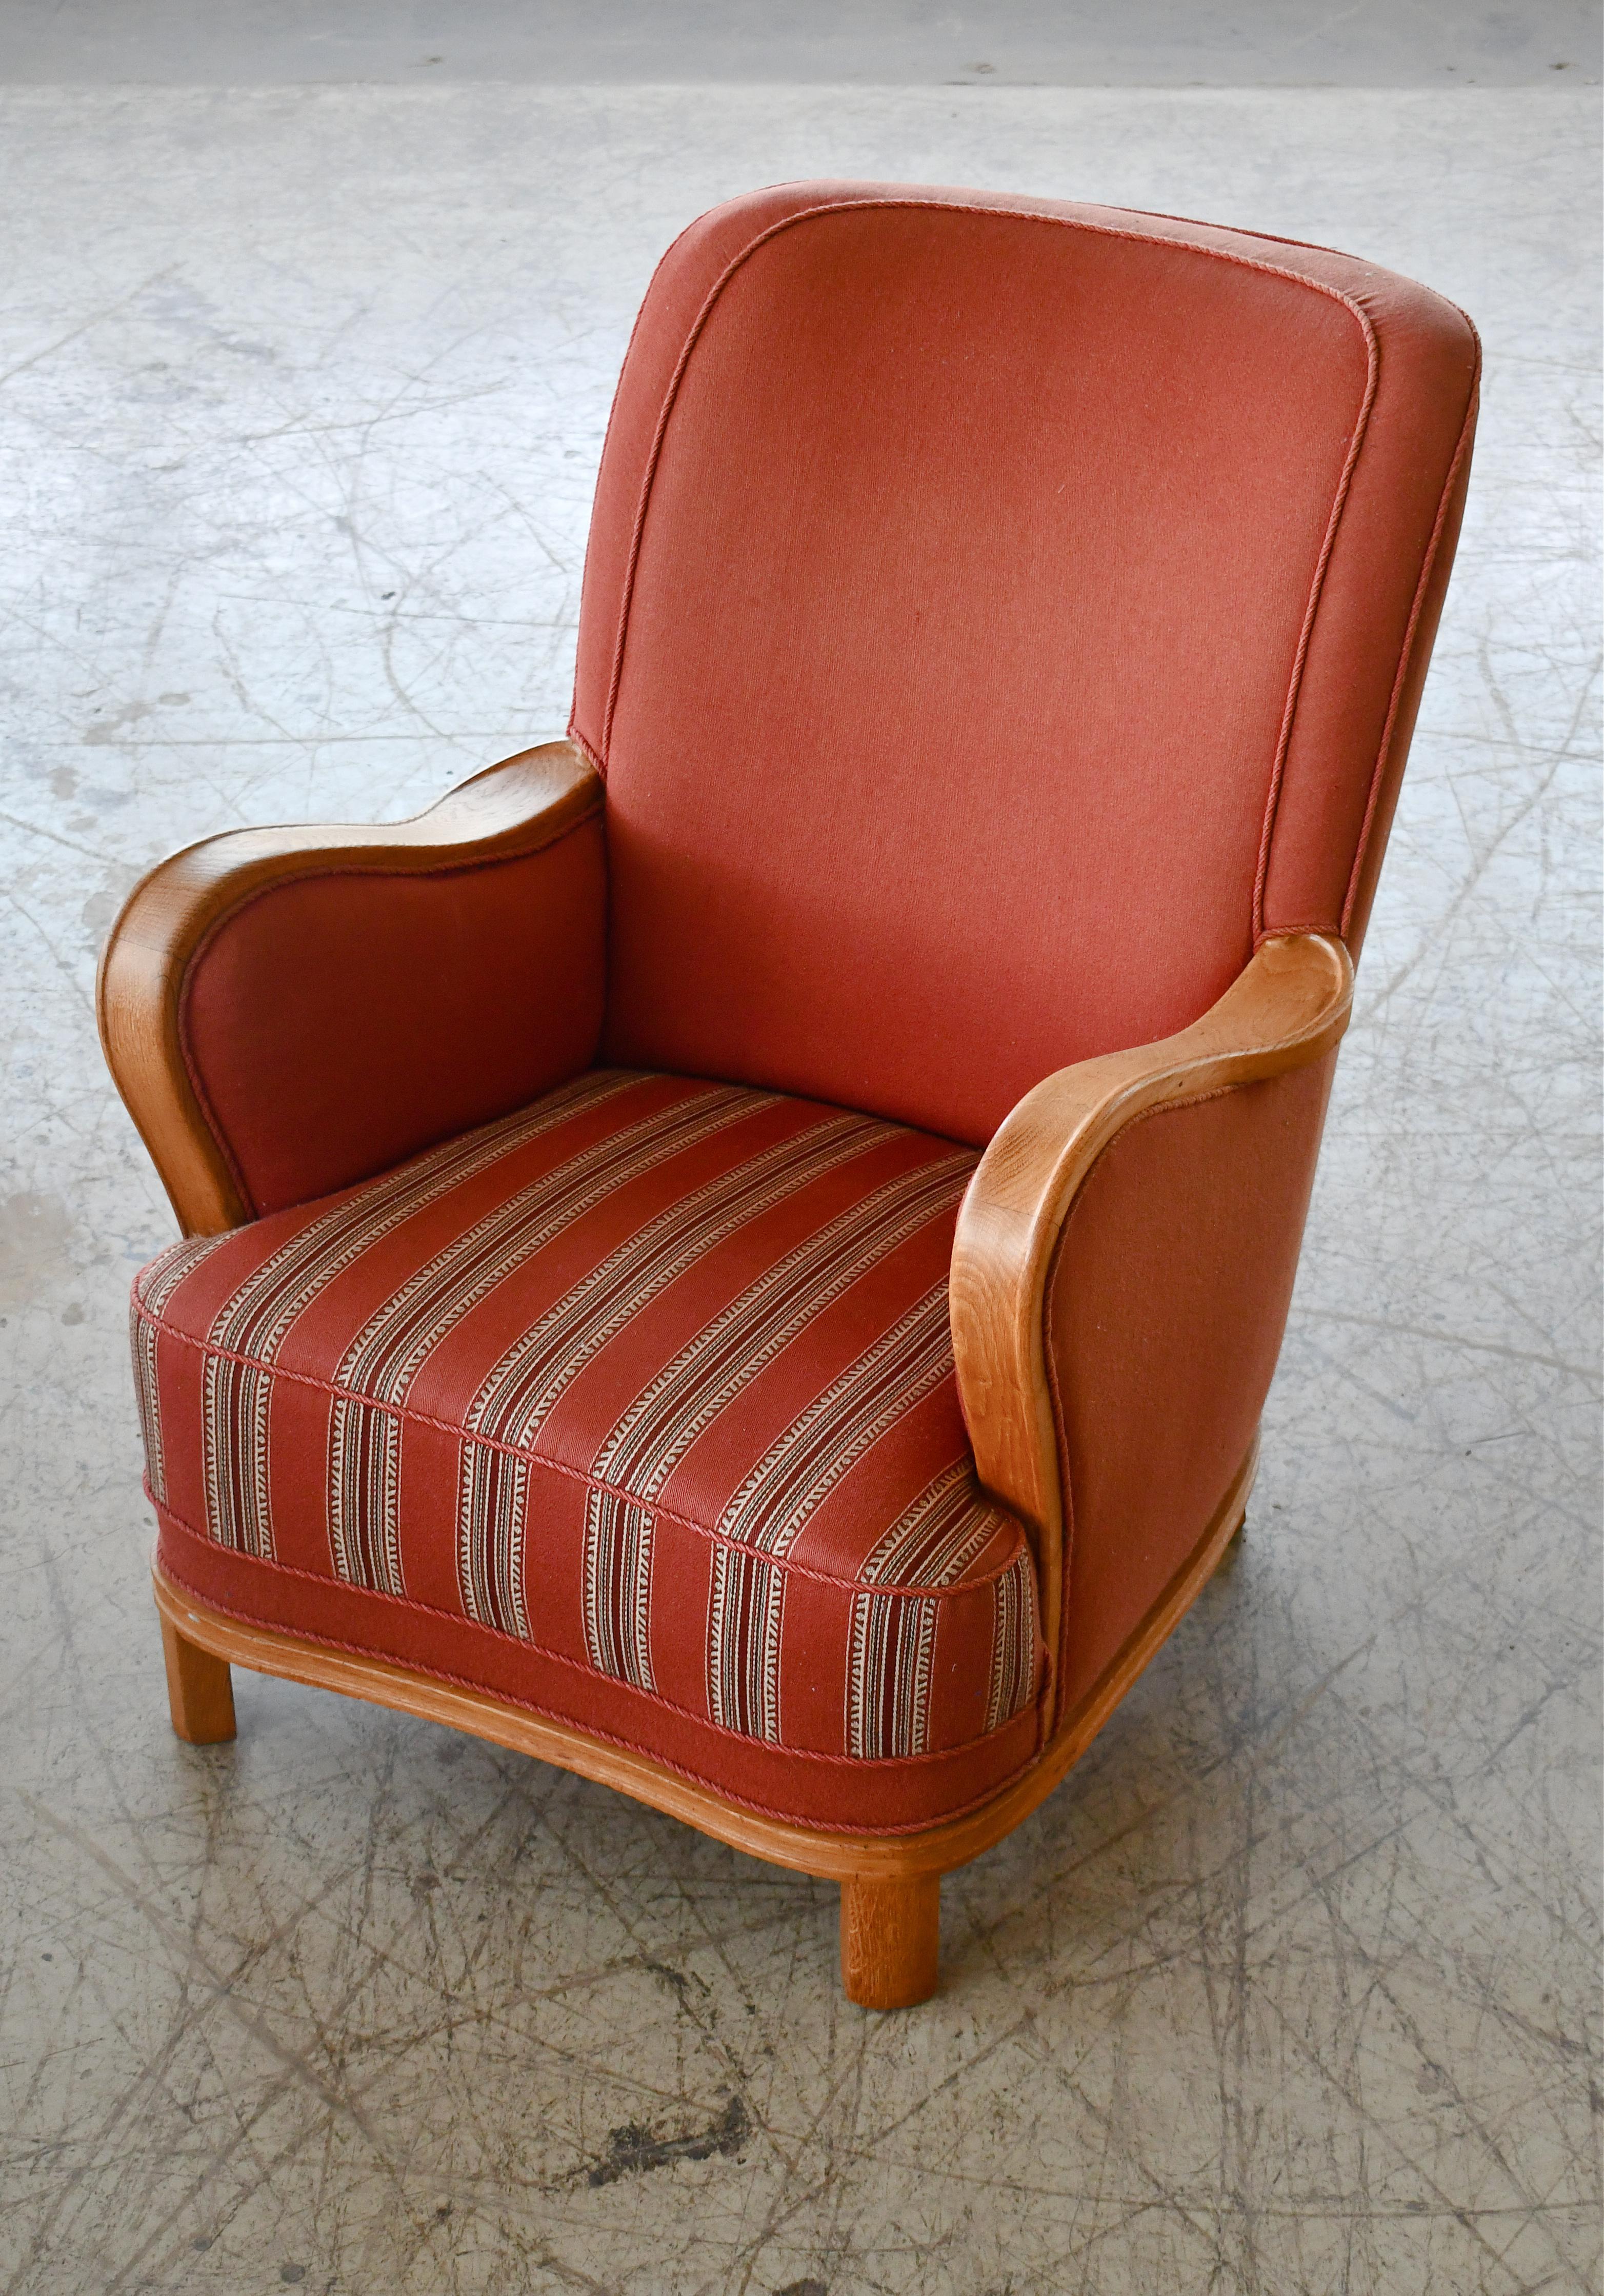 Scandinavian Lounge Chair with Oak Armrest and Base Two-Tone Wool, 1940's For Sale 1